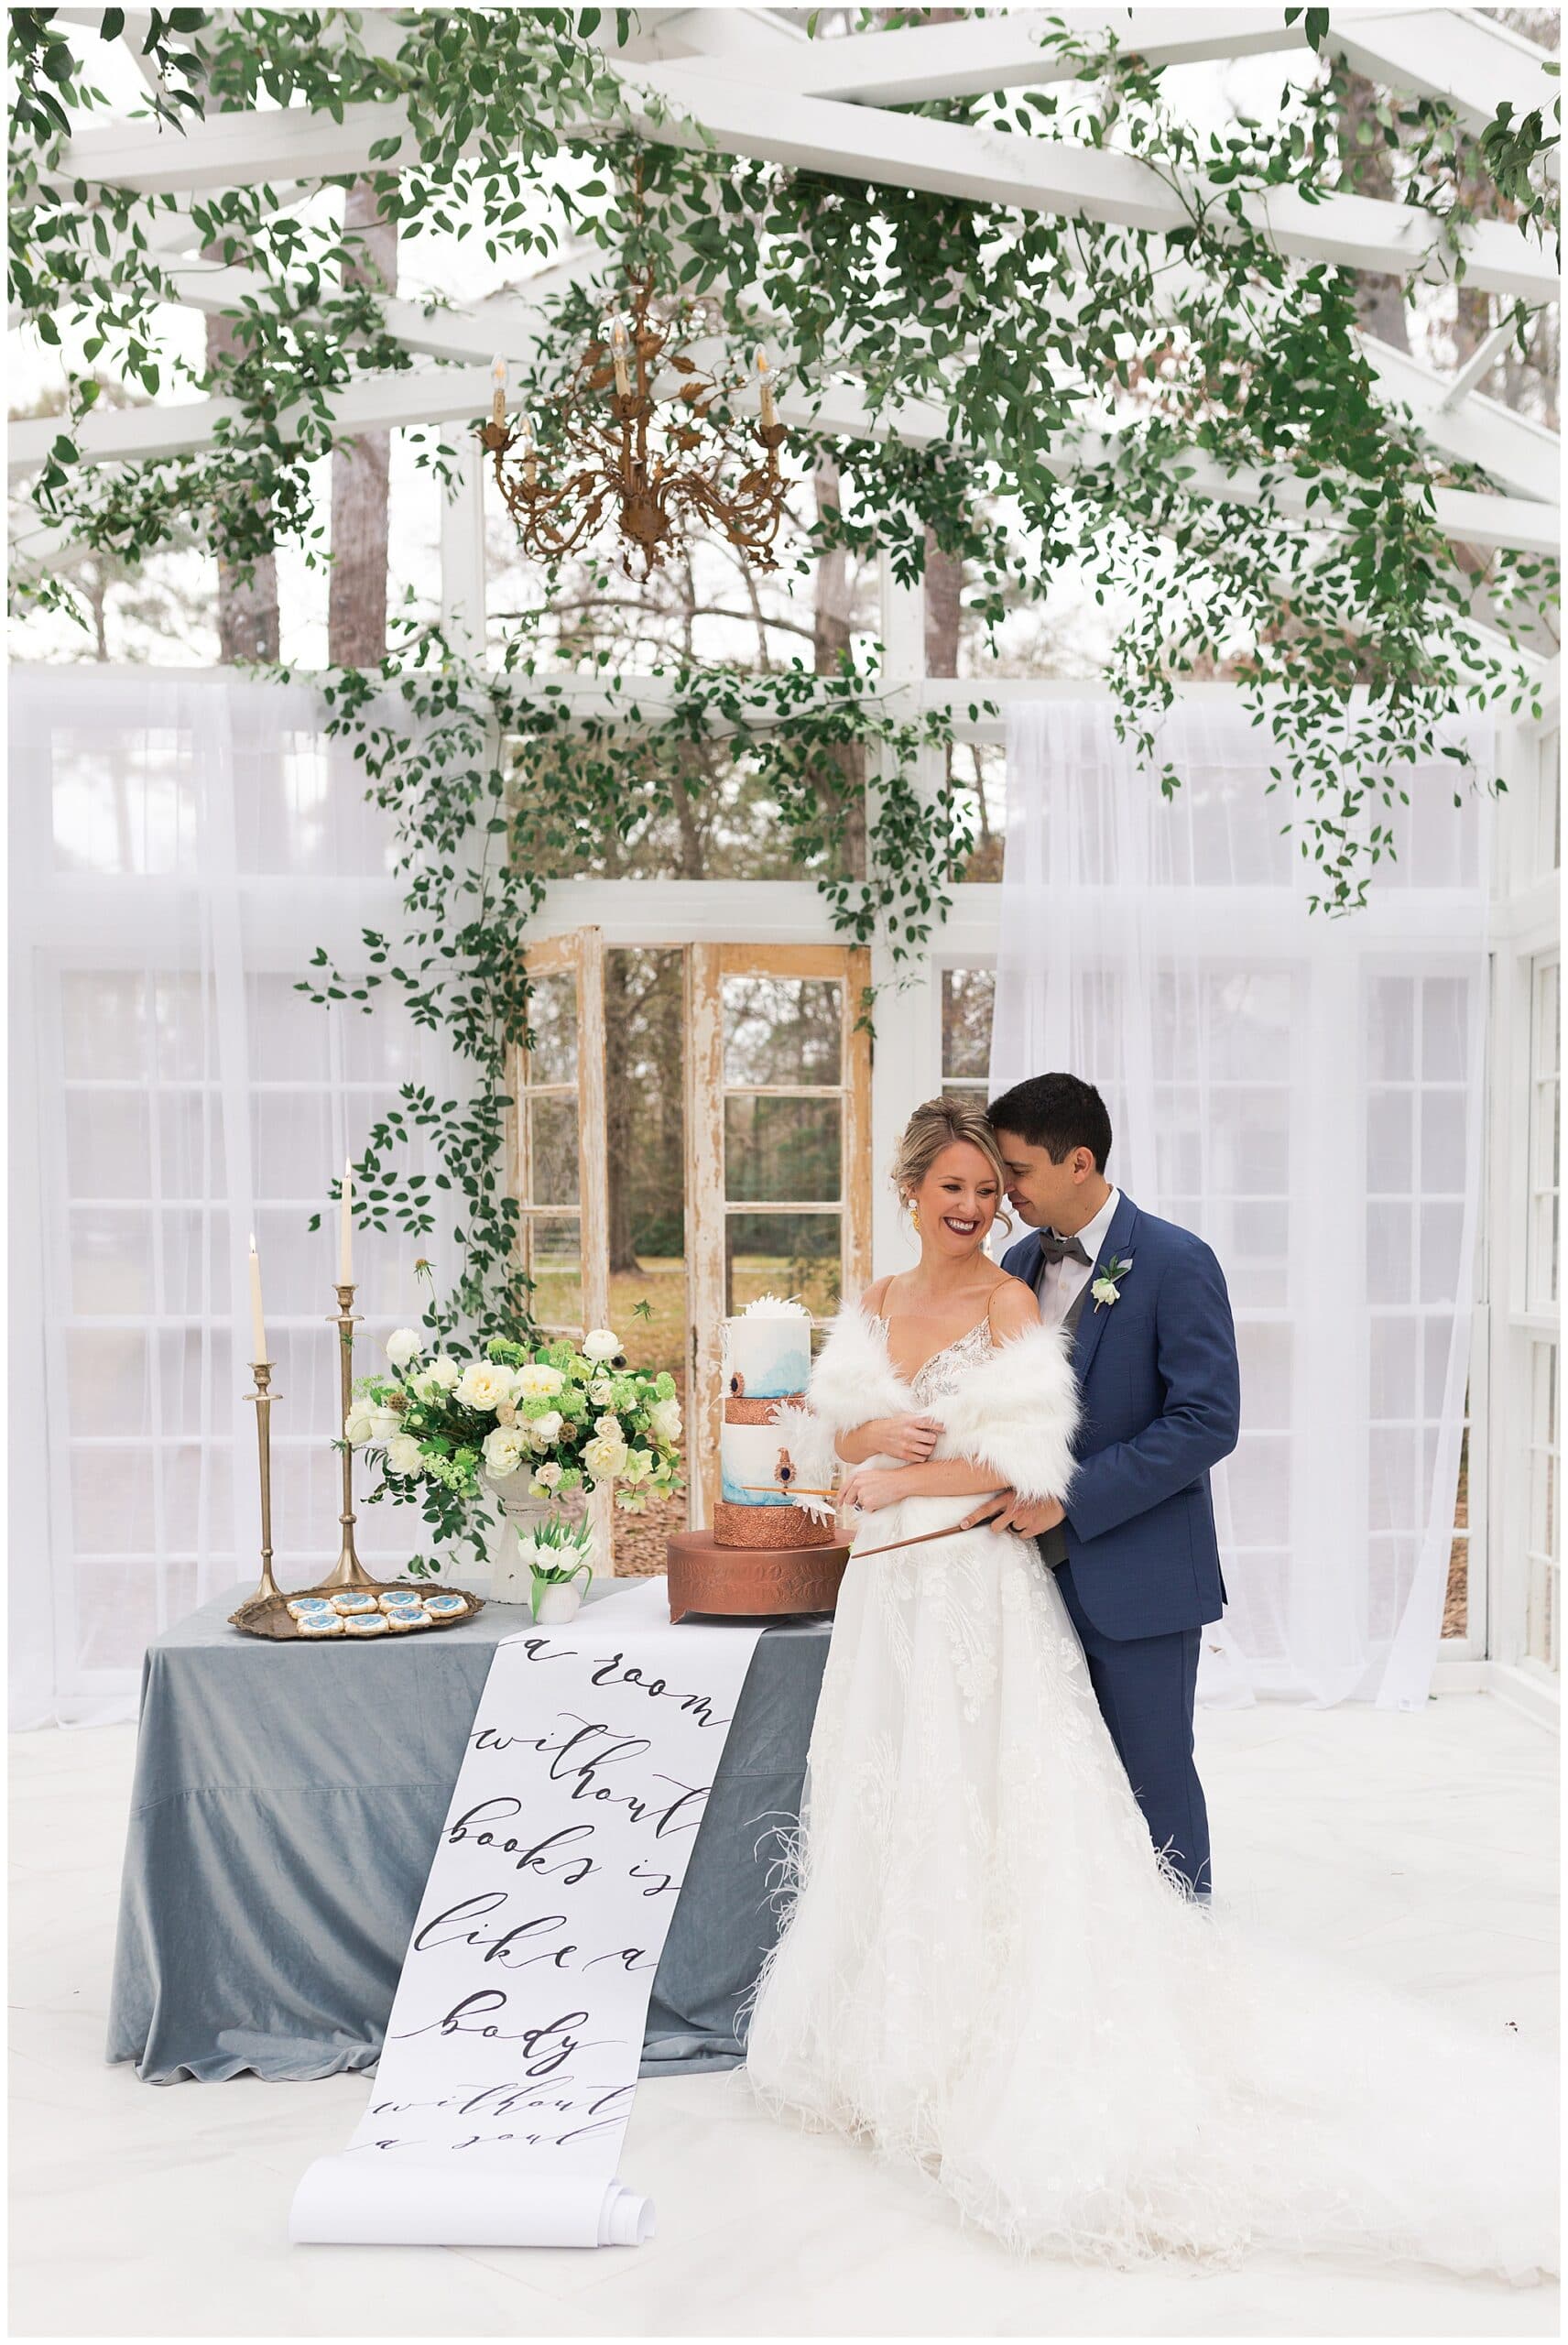 Ravenclaw inspired wedding at Oak Atelier in Houston, Texas photographed by Swish and Click Photography